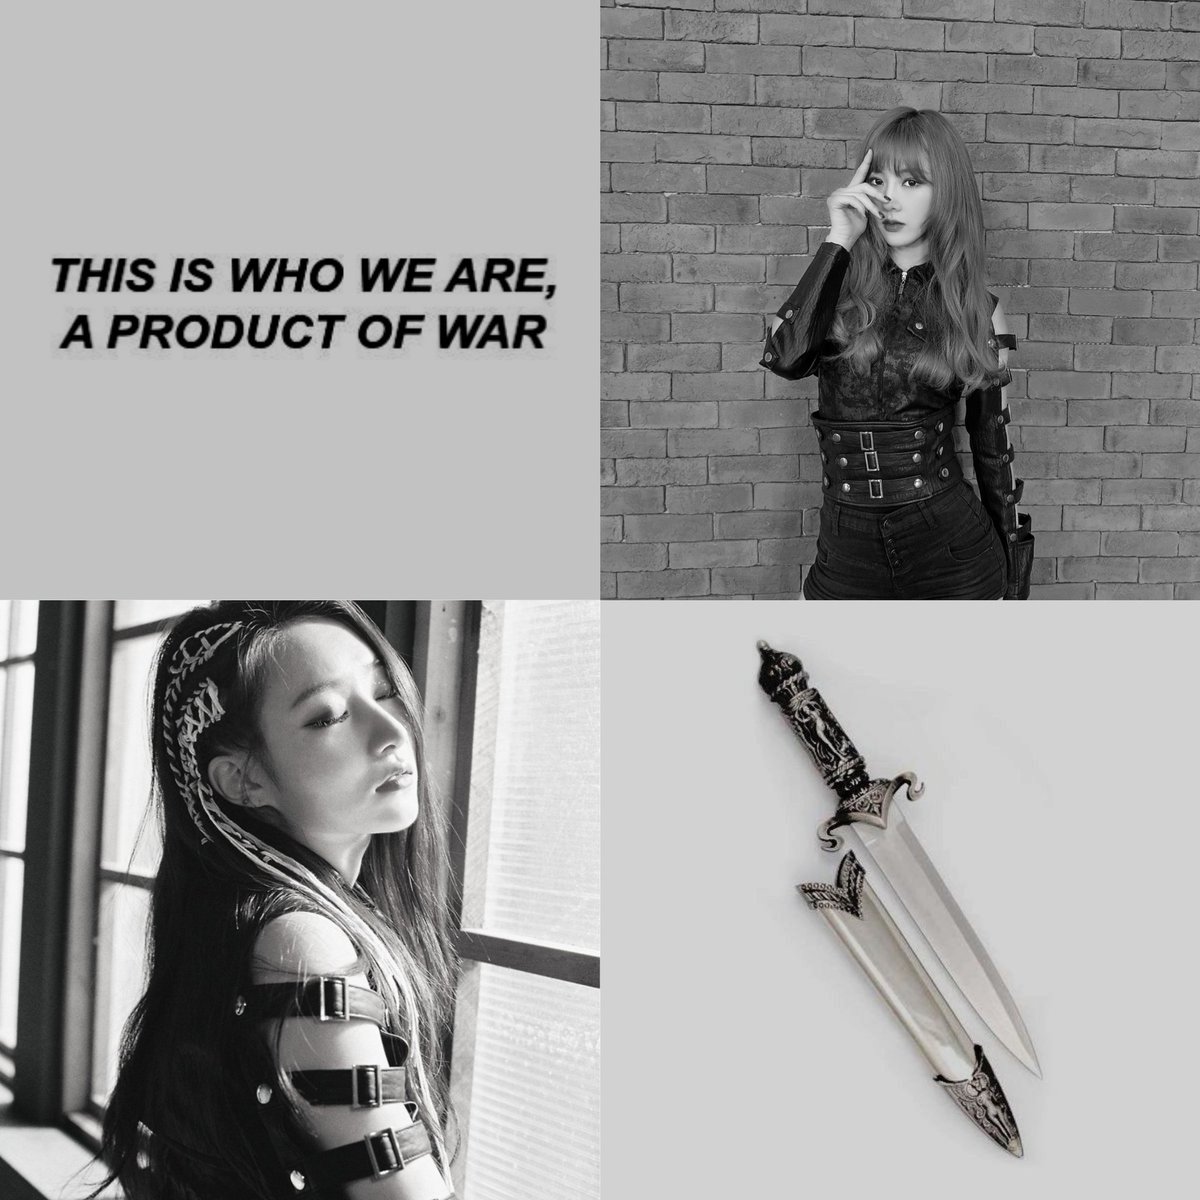 "a blade directed at someone eventually returns"bora and yoohyeon went from rivals to lovers in their training period. years later, they face each other on the battlefield - fighting the war on opposing sides.